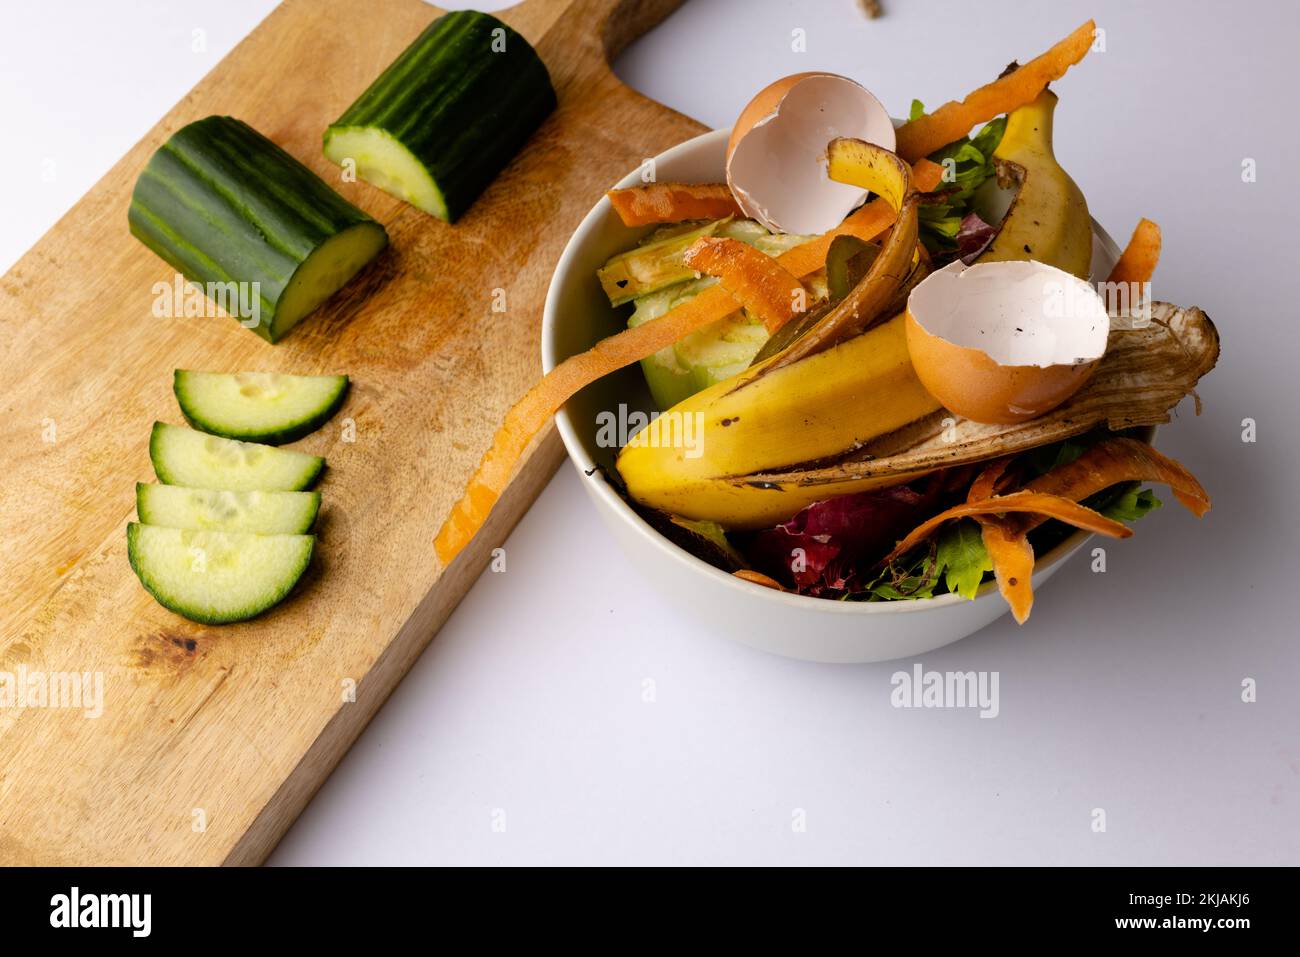 Cucumber on chopping board with organic food waste in kitchen composting bin Stock Photo